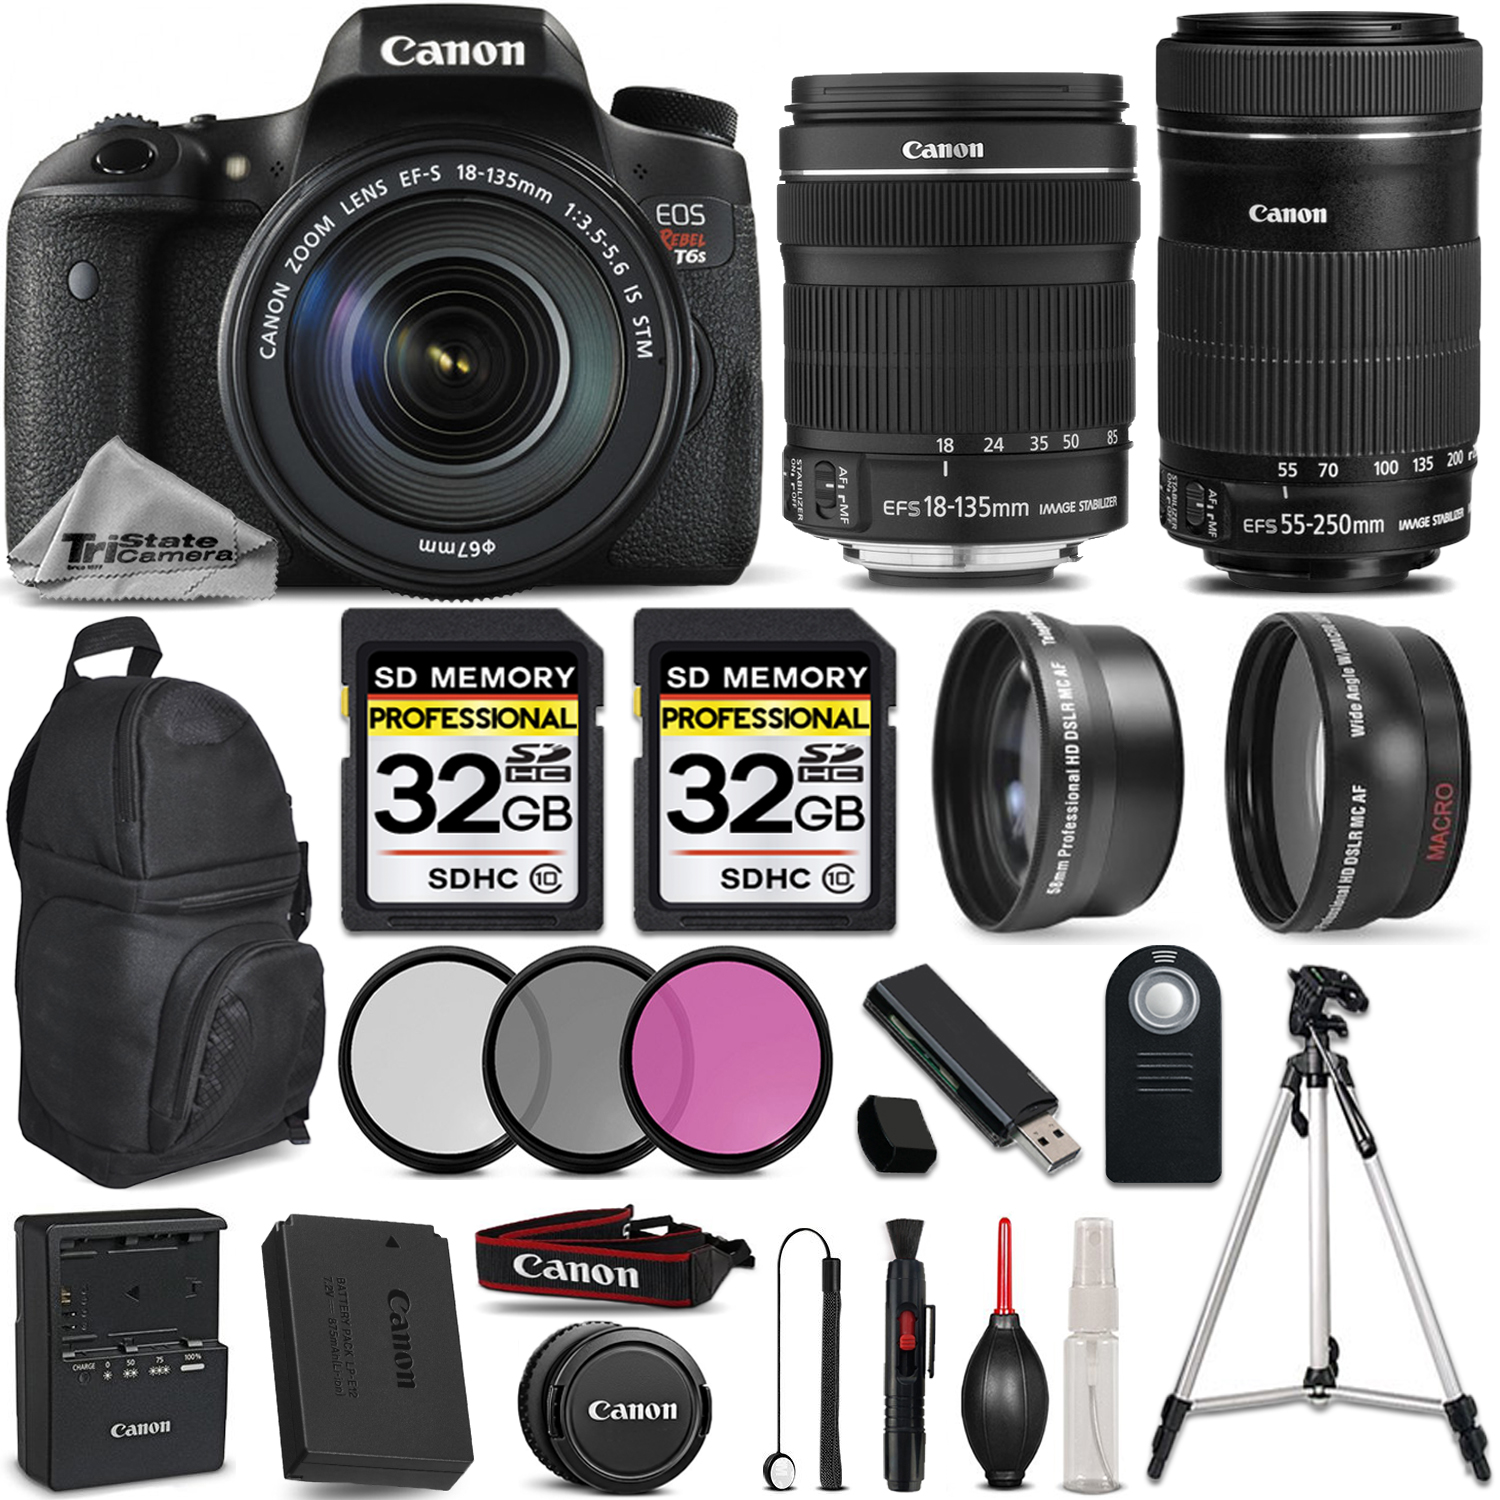 EOS T6s DSLR Camera + 18-135mm IS STM Lens +Canon 55-250 IS STM - PRO KIT *FREE SHIPPING*